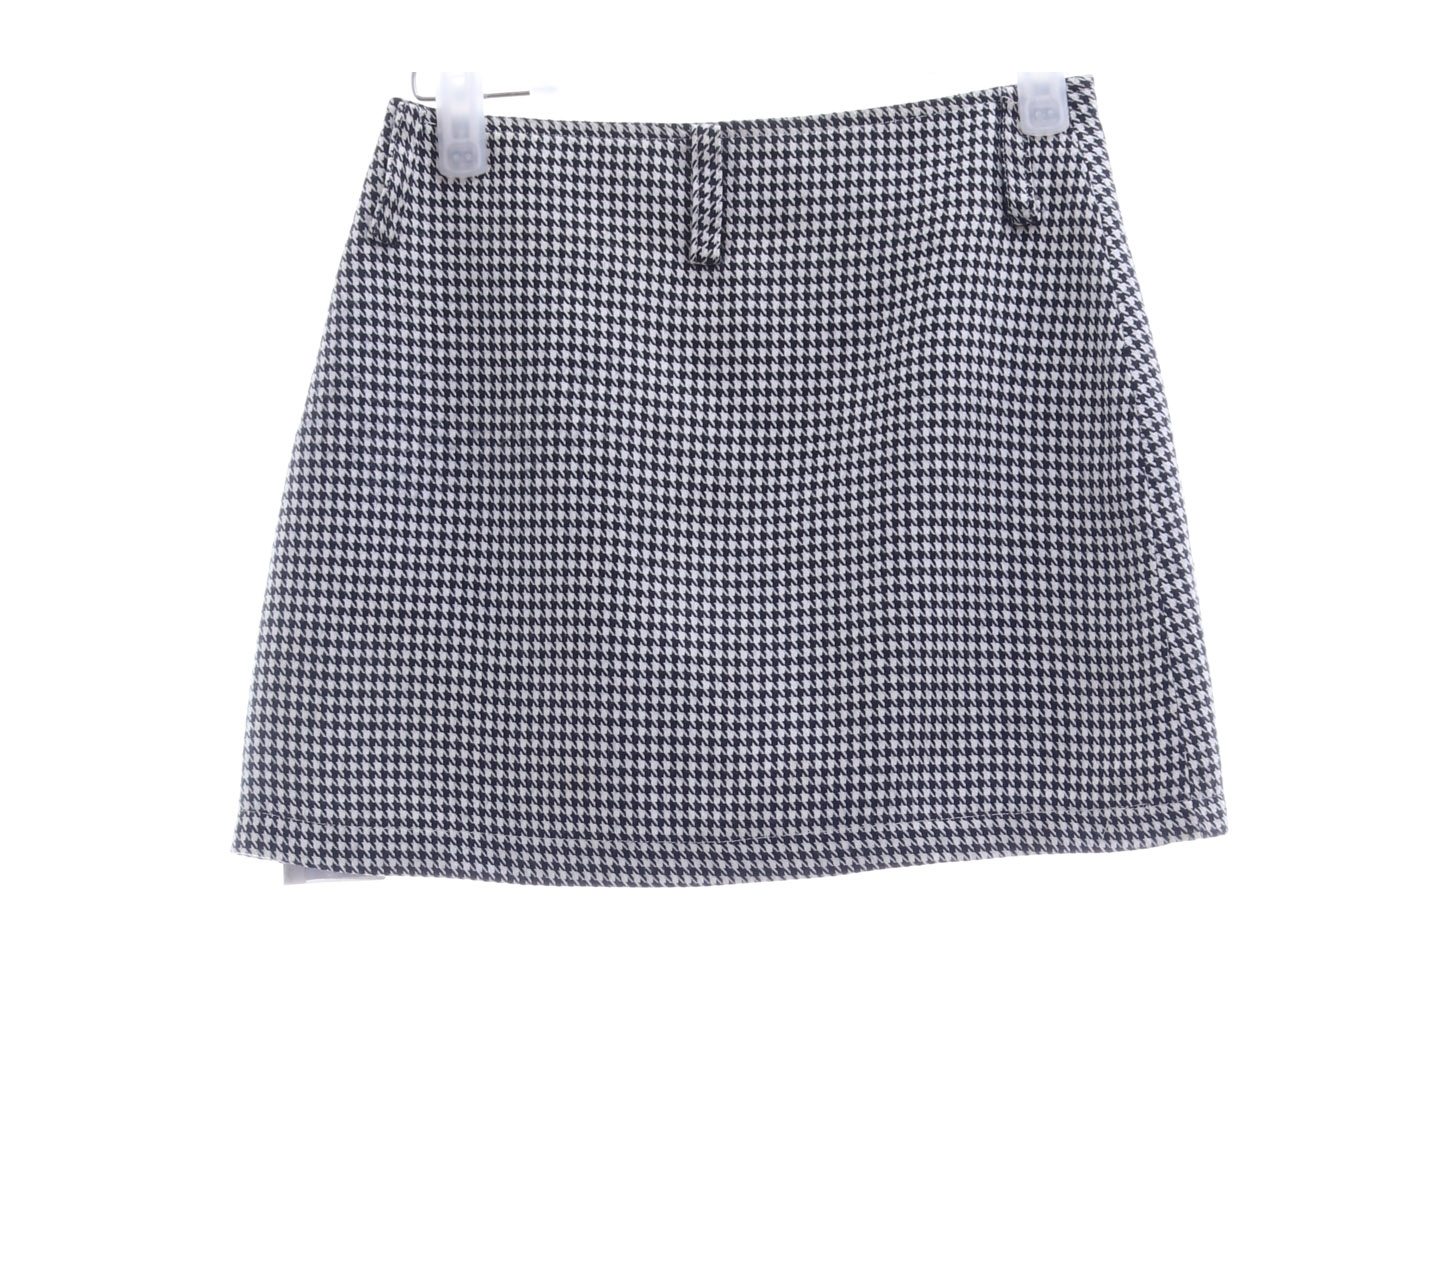 Cecil McBee Black and Off White Houndstooth Mini Skirt